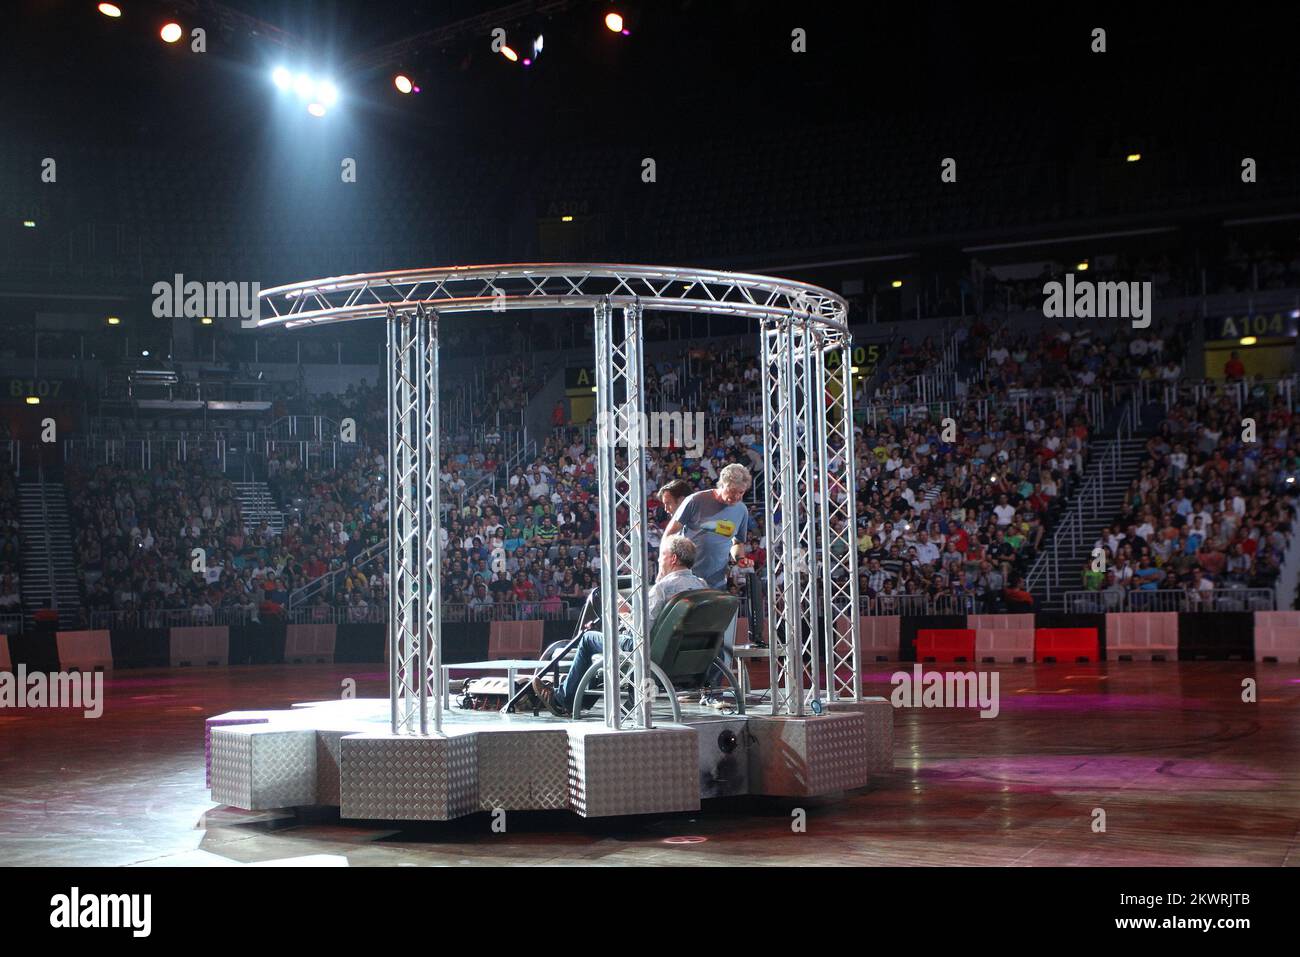 The legendary TV show hosts Jeremy Clarkson, Richard Hammond, James May and the mysterious driver Stig perform a variety of stunts and challenges at Arena Zagreb in spectacular automotive show, Top Gear Live.  Stock Photo